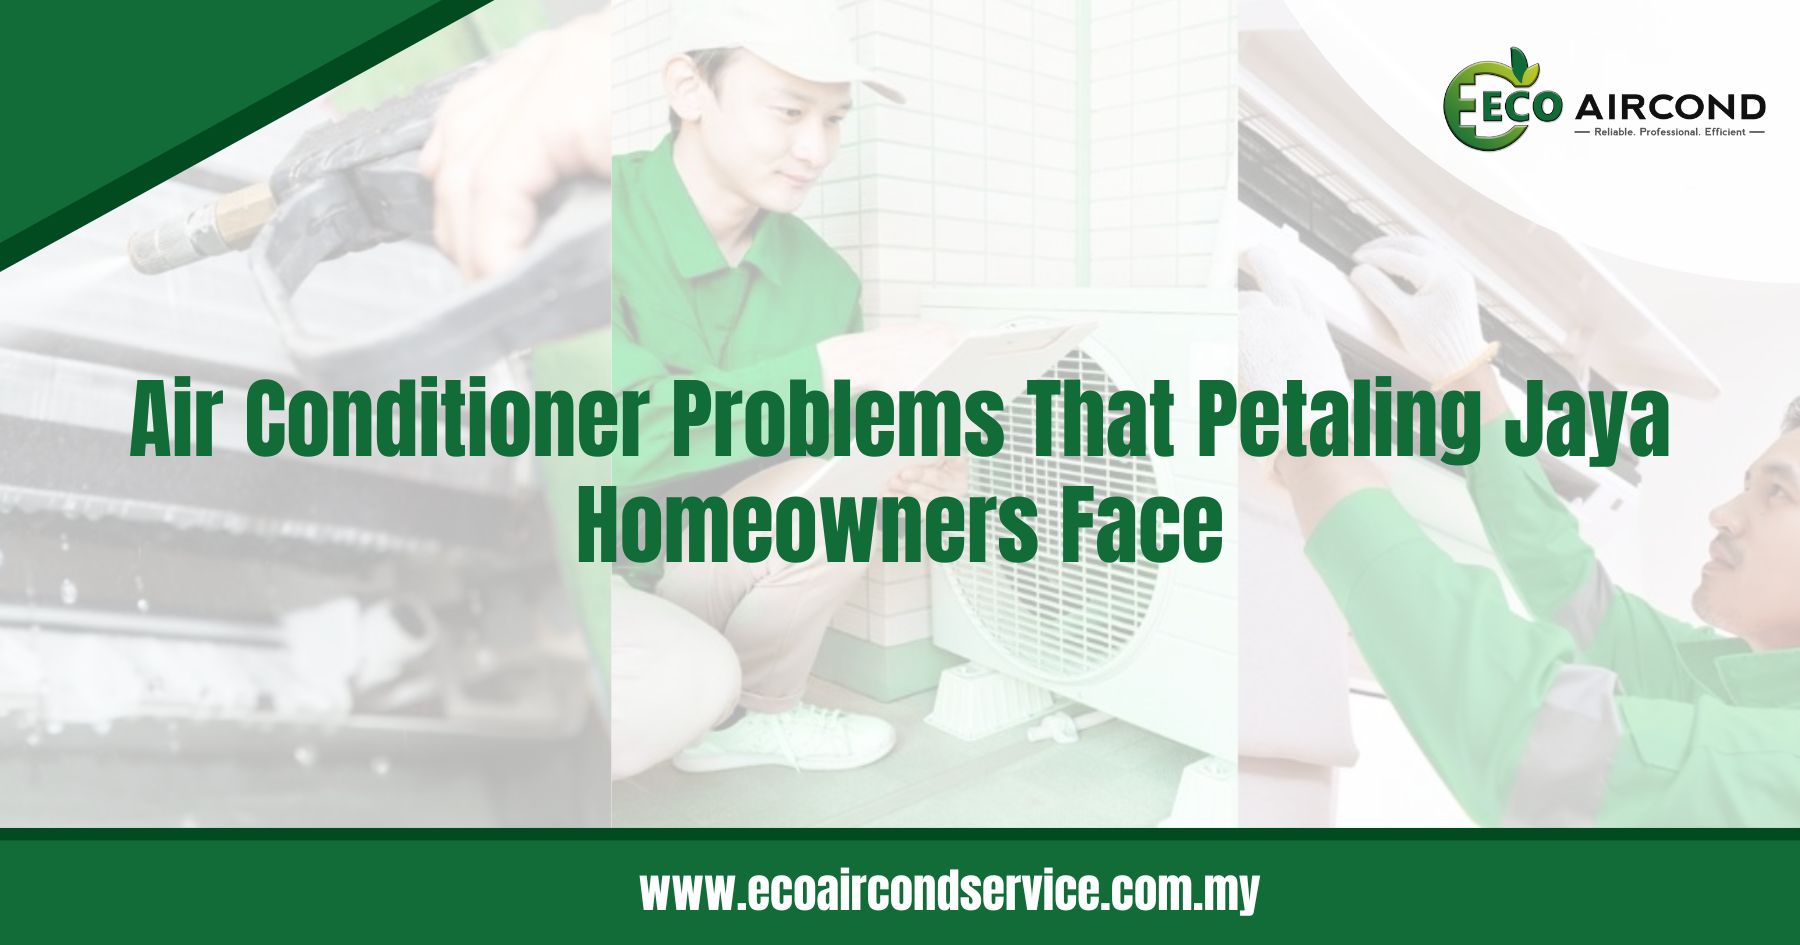 Air Conditioner Problems That Petaling Jaya Homeowners Face